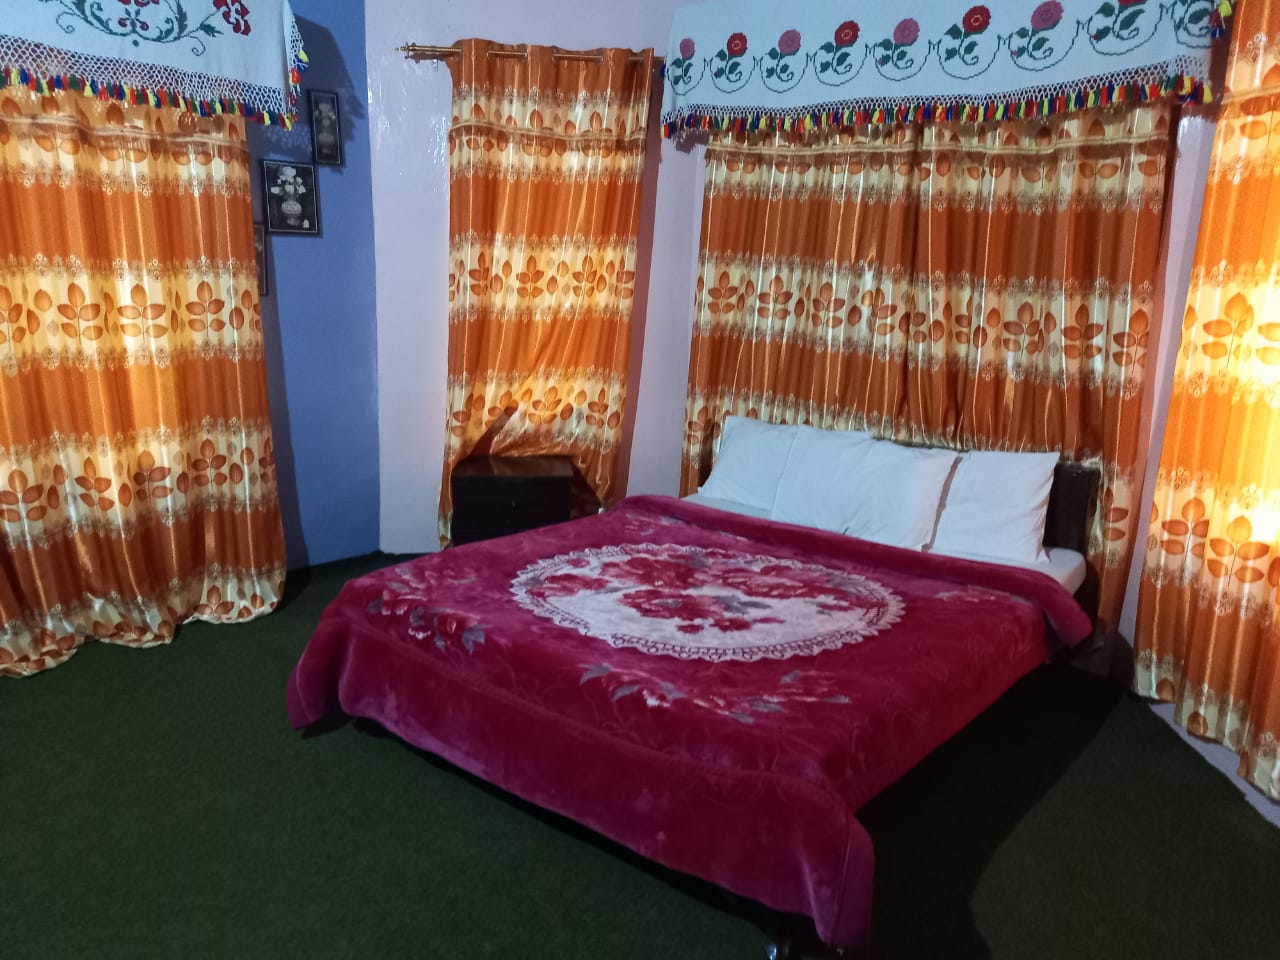 Room of a Traditional Hotel in Hunza Nagar with Double bed